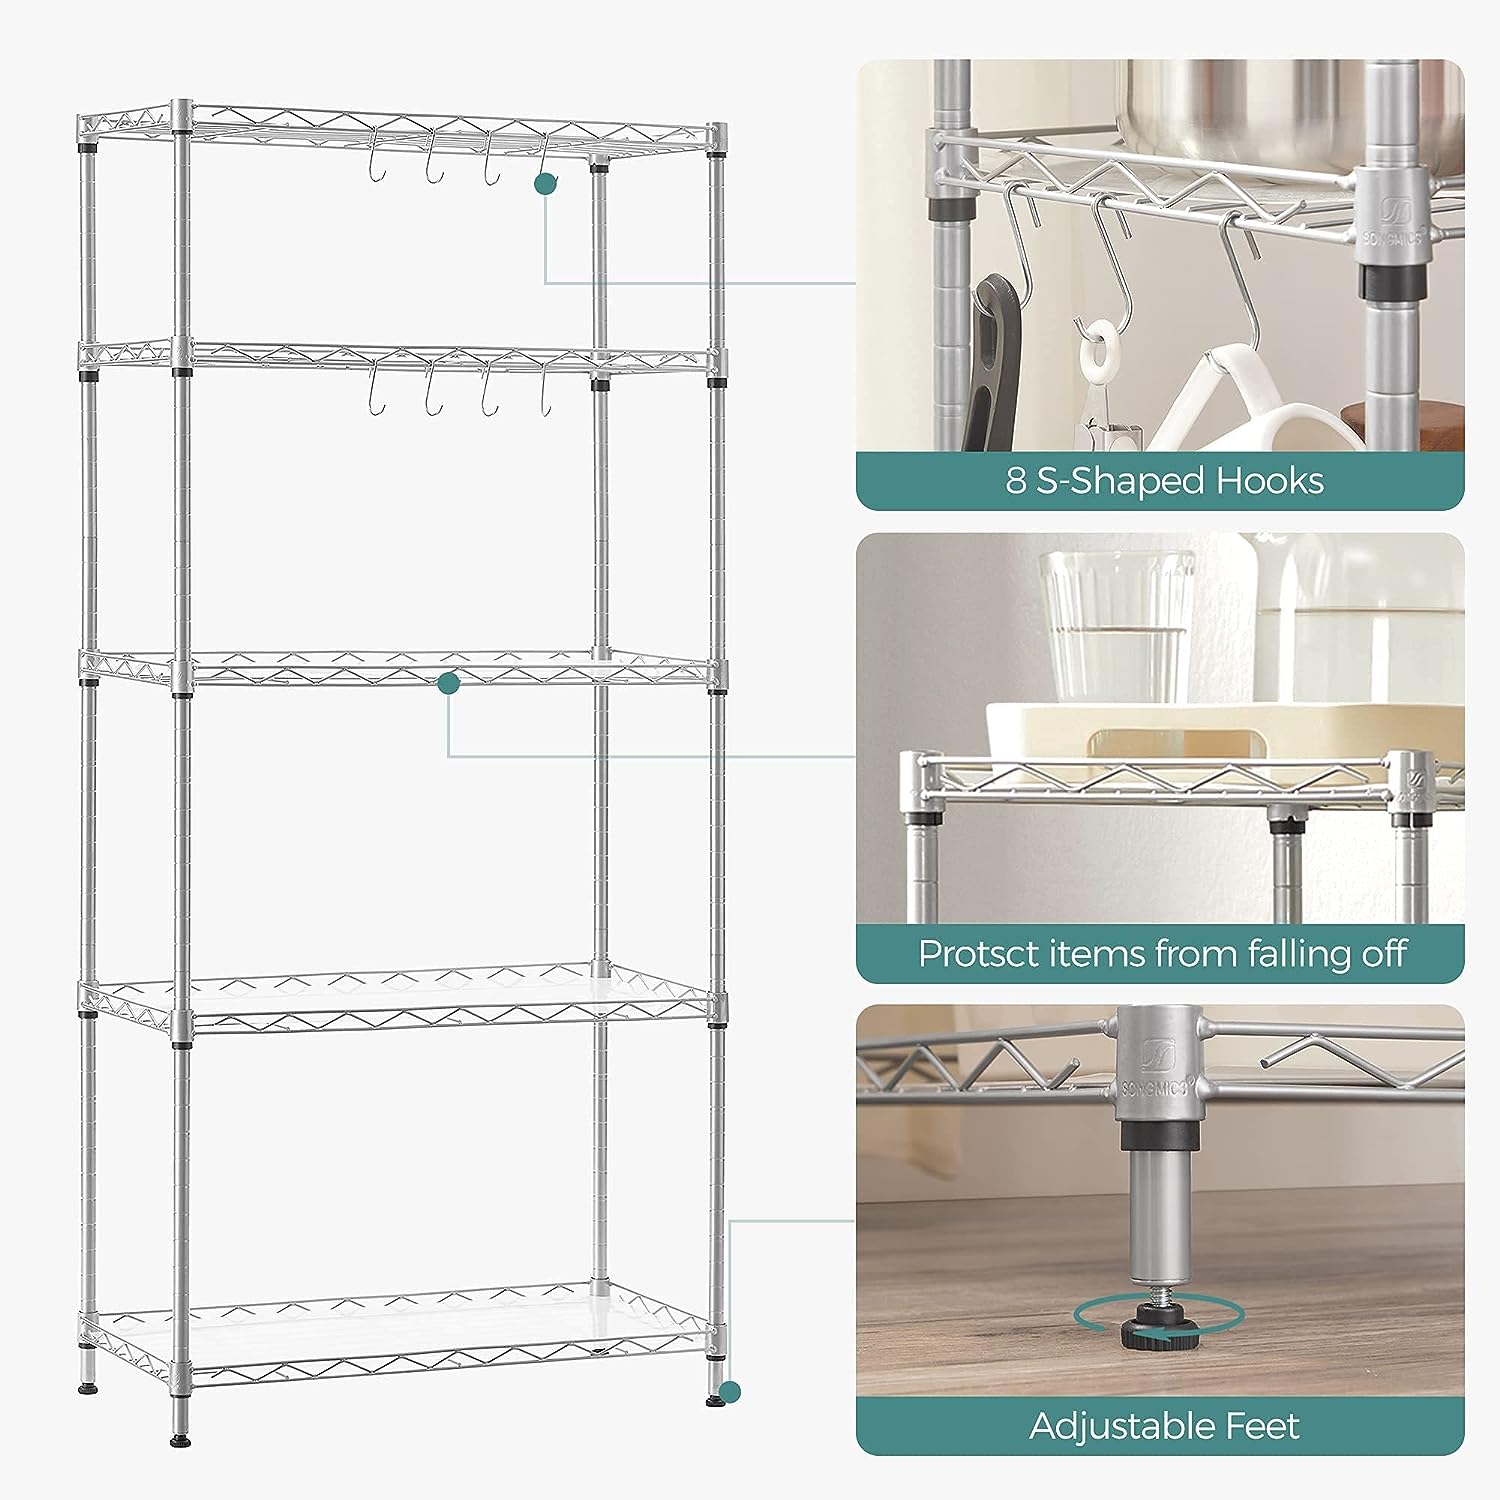 SONGMICS 4 Tier Over The Toilet Storage Metal Storage Rack with Adjustable Shelves and Hooks Space-Saving Bathroom Shelf Organizer, Silver Gray